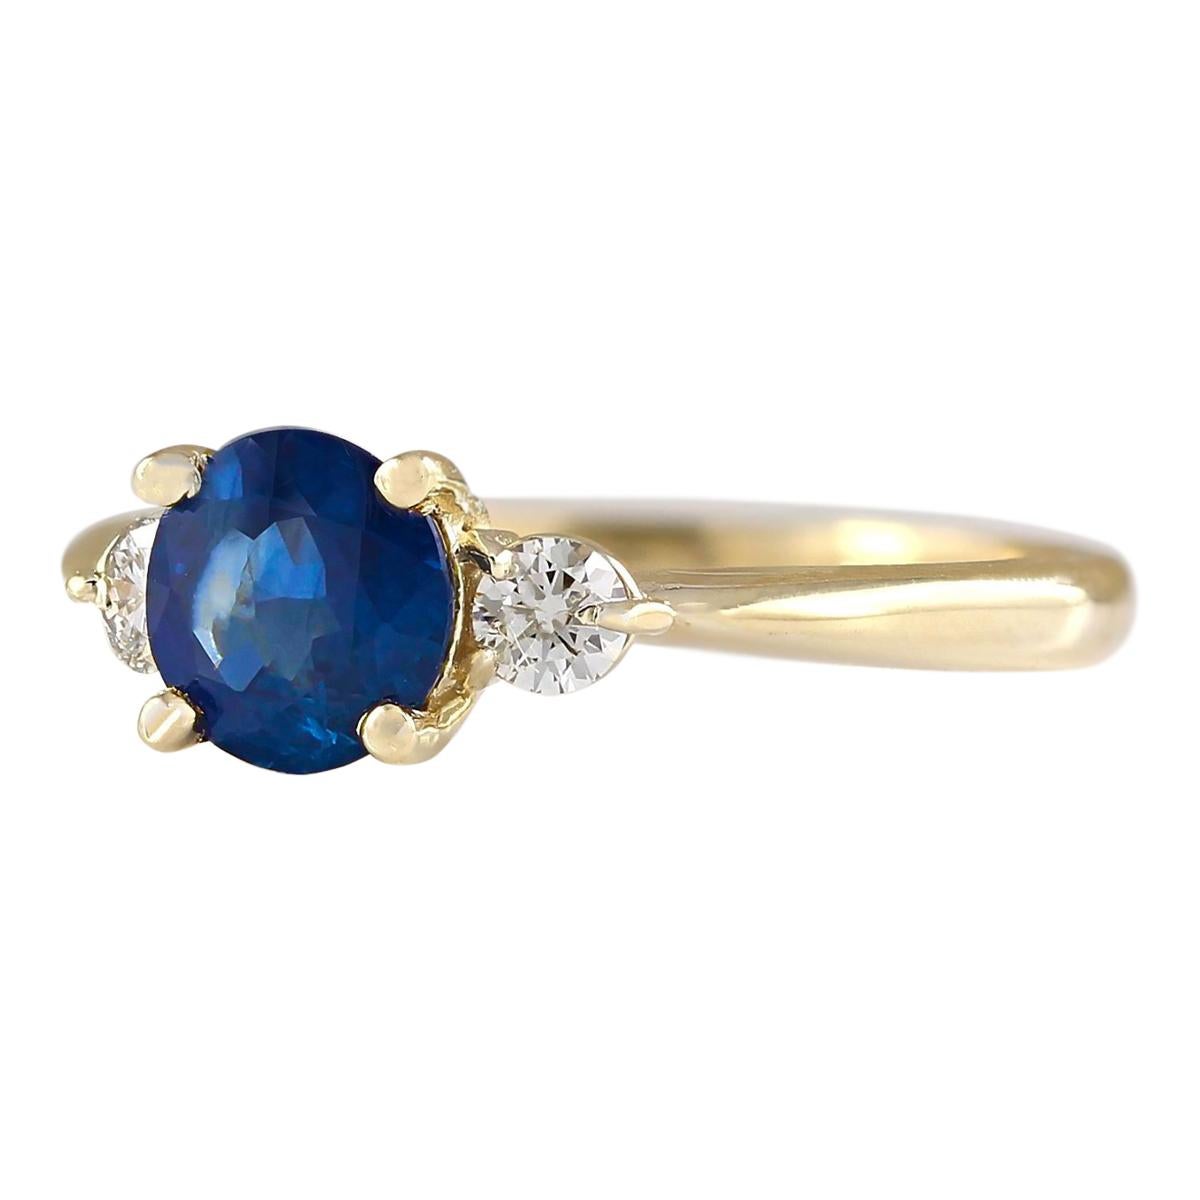 Stamped: 14K Yellow Gold
Total Ring Weight: 2.2 Grams
Total Natural Sapphire Weight is 1.20 Carat (Measures: 6.00x6.00 mm)
Color: Blue
Total Natural Diamond Weight is 0.20 Carat
Color: F-G, Clarity: VS2-SI1
Face Measures: 6.00x11.65 mm
Sku: [703254W]